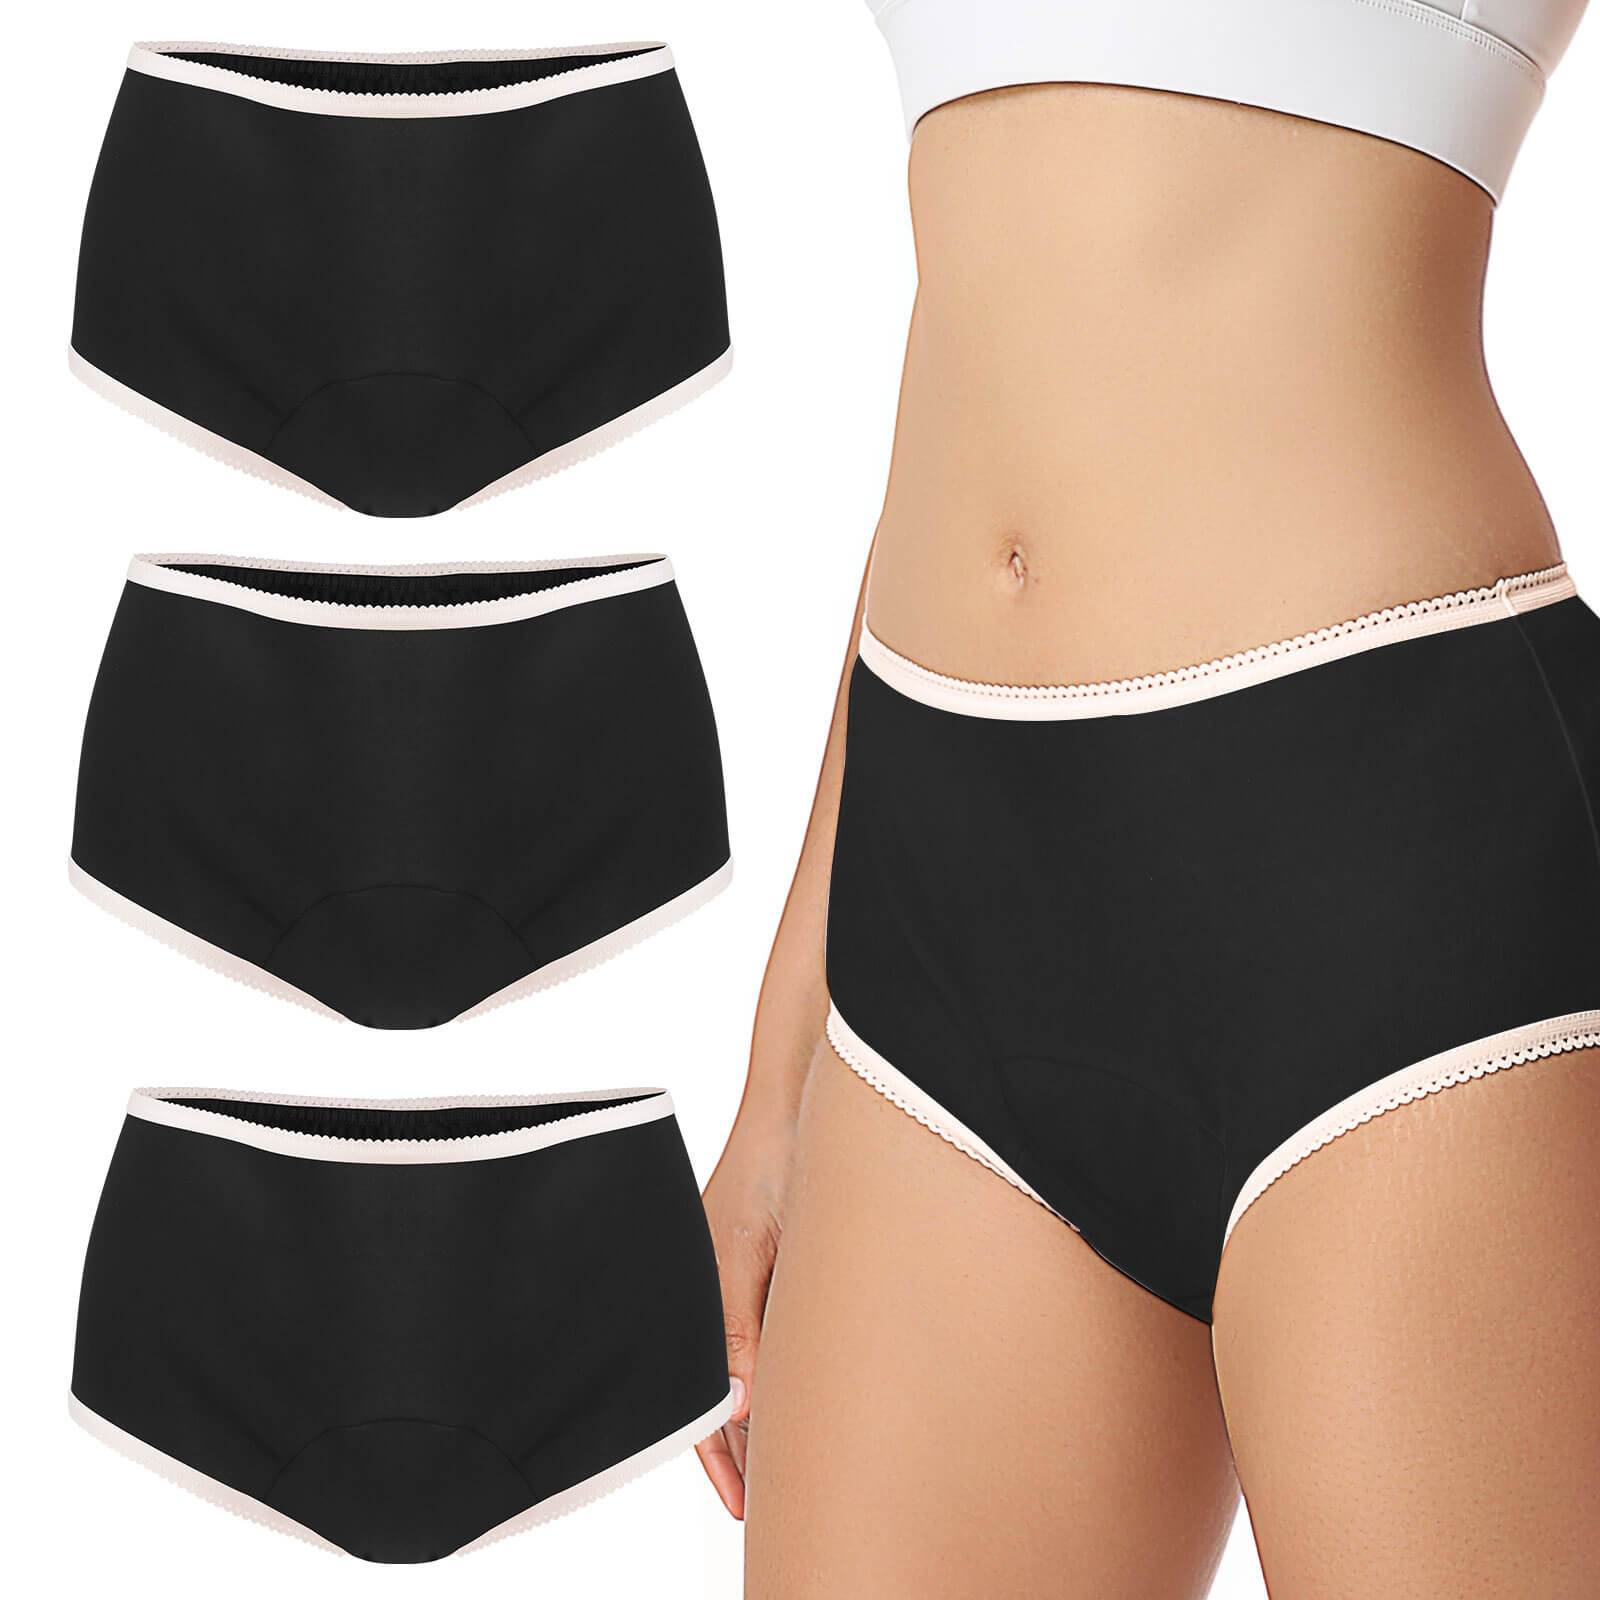 Womens Incontinence Underwear Protective Leakproof Moderate